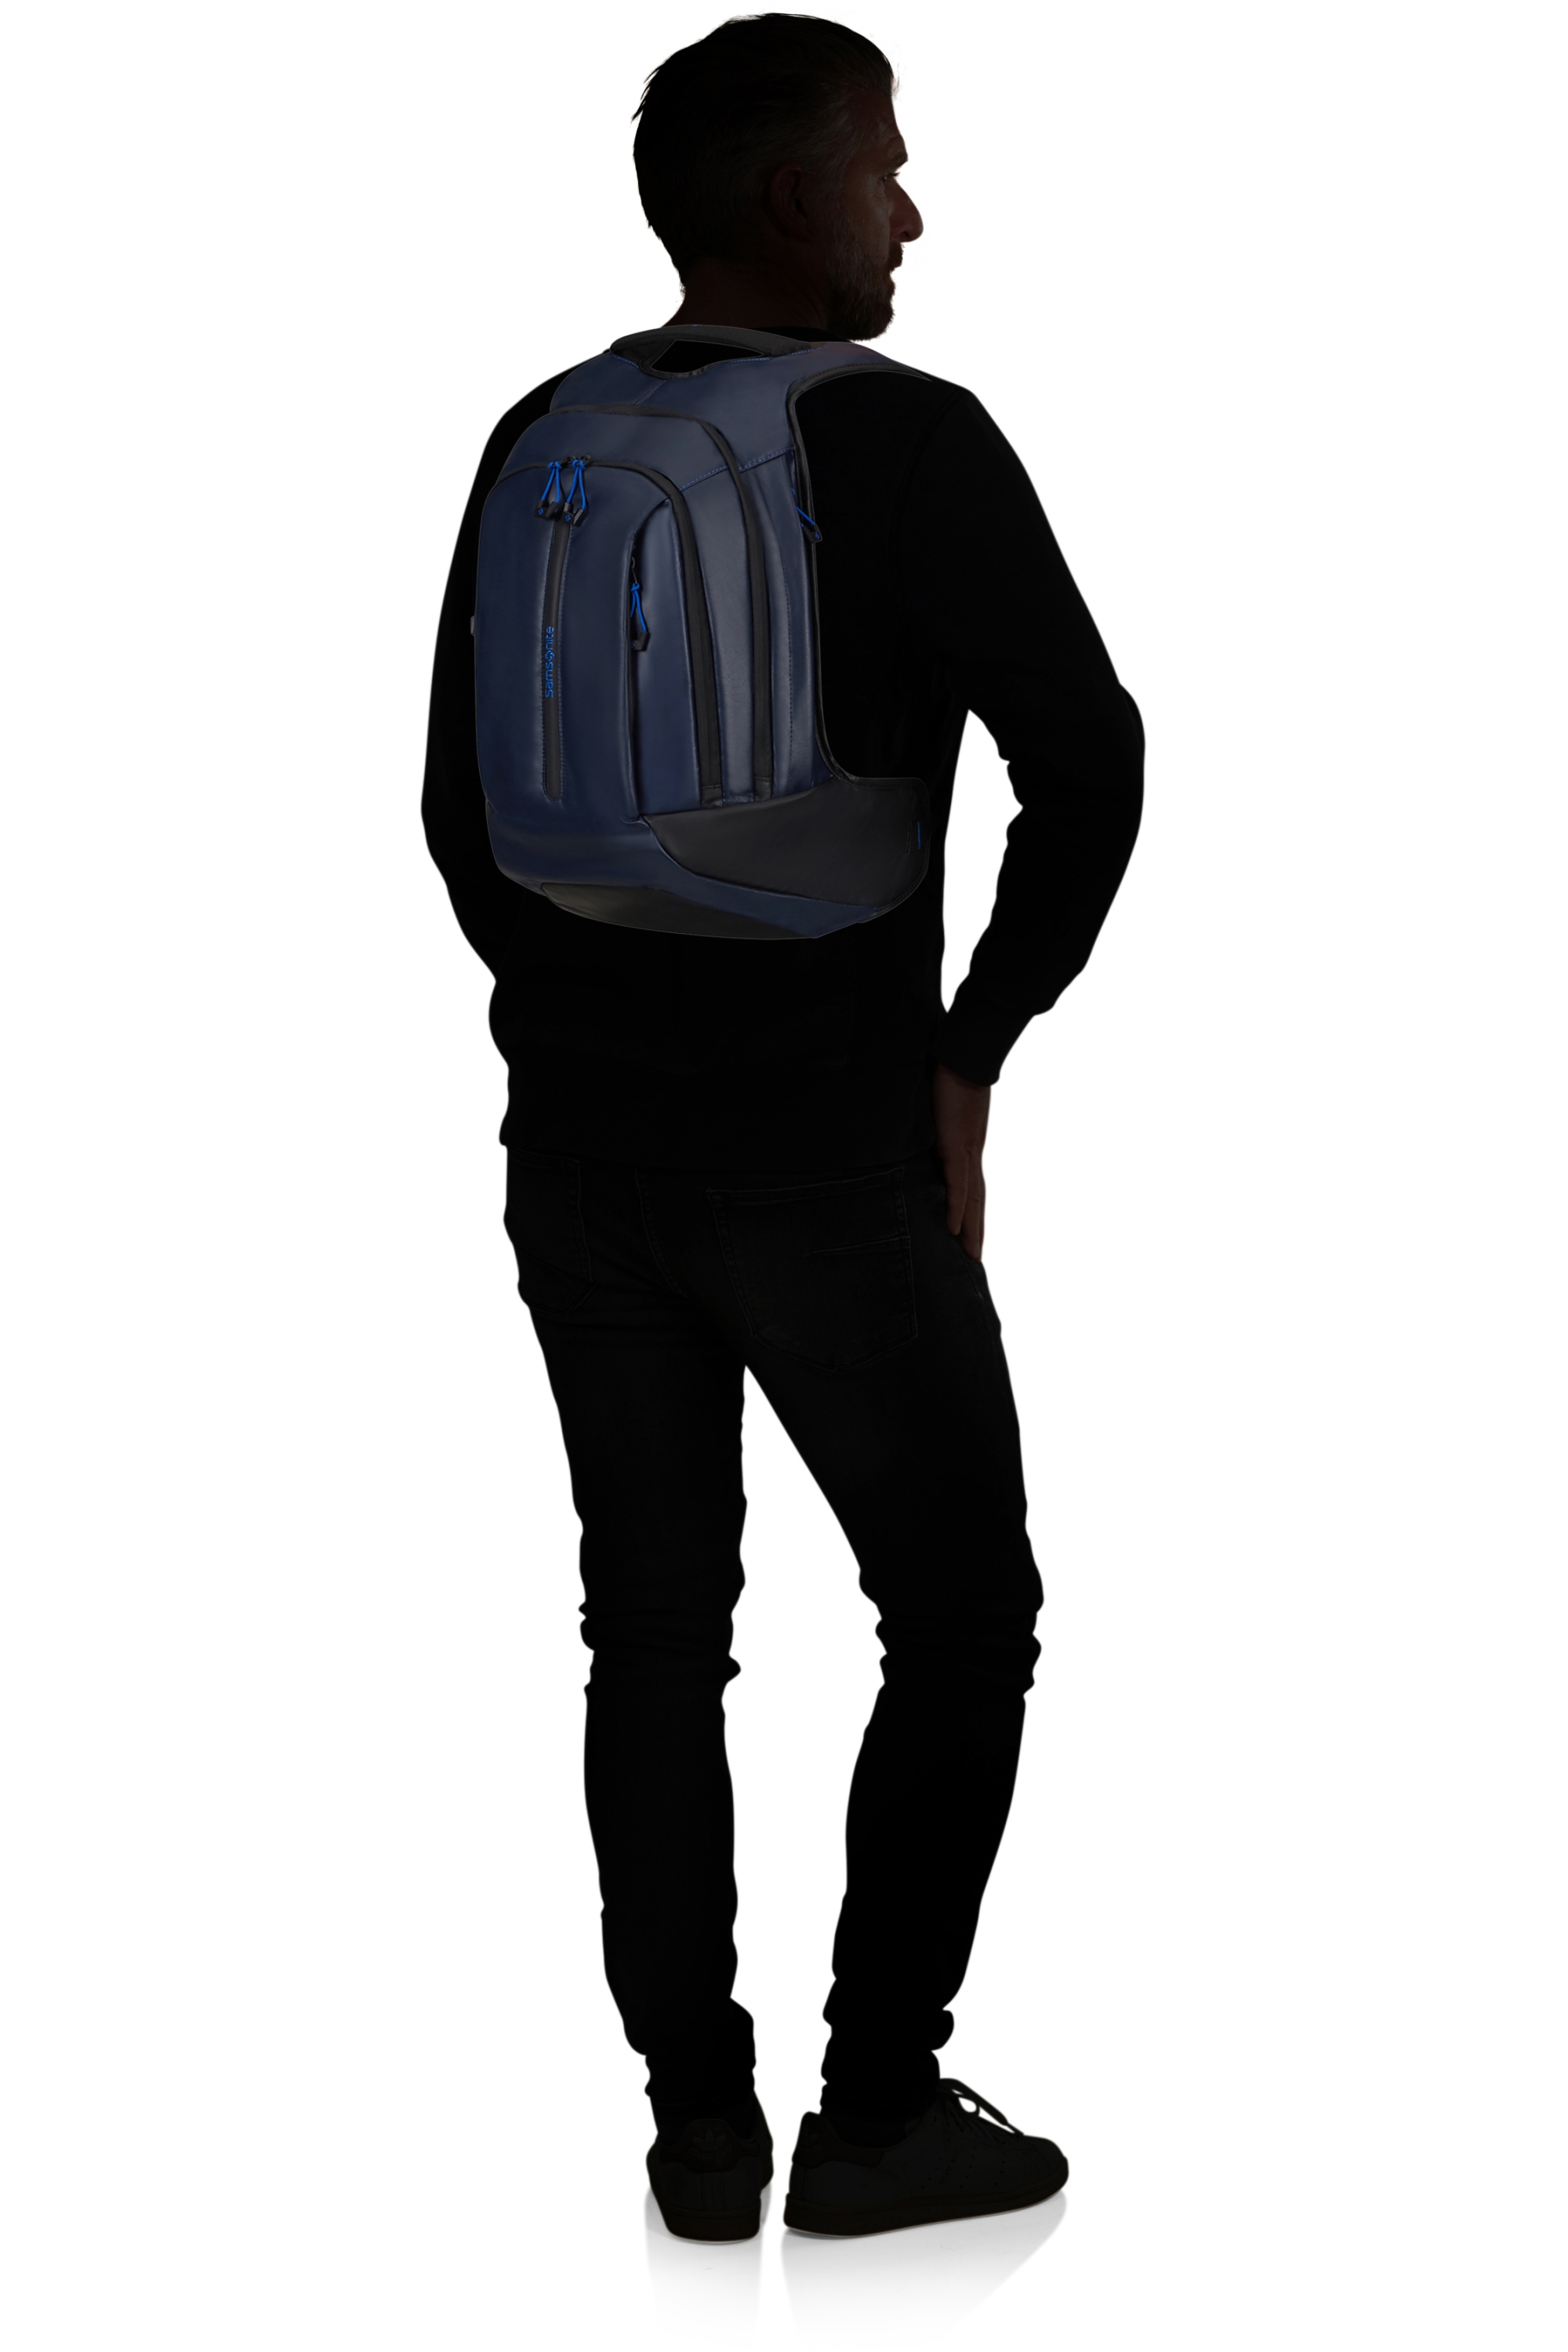 140871-2165-140871_2165_ecodiver_laptop_backpack_m_with%20silhouette-e7fd2cf1-66ab-427b-92fc-ae5b01038936-png